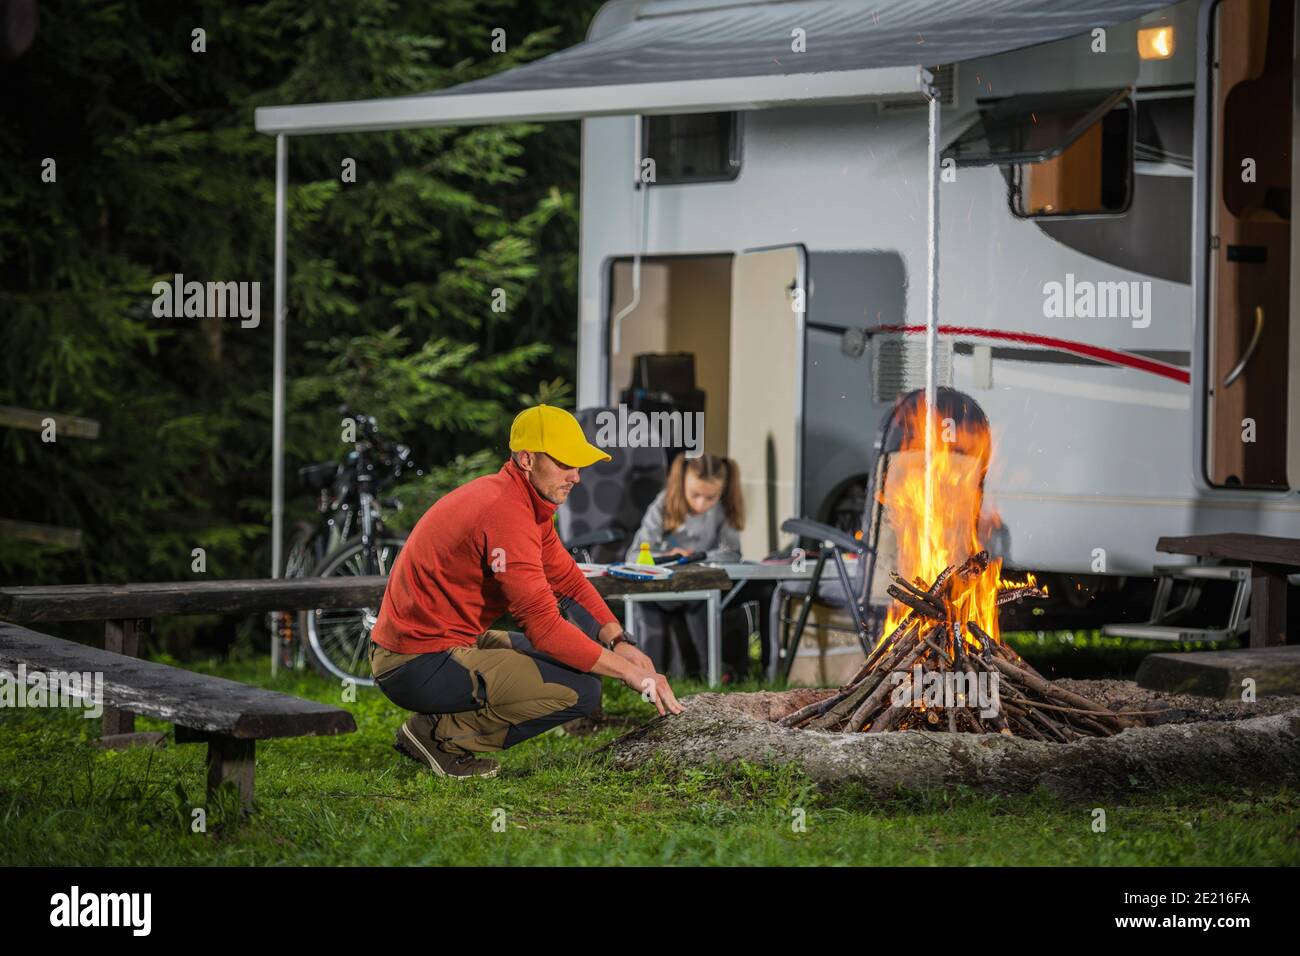 Caucasian Family on the Summer Camping. Father Spending Time Near Campfire. His Daughter Writing Vacation Destination Letter Next to RV Camper Van. Stock Photo